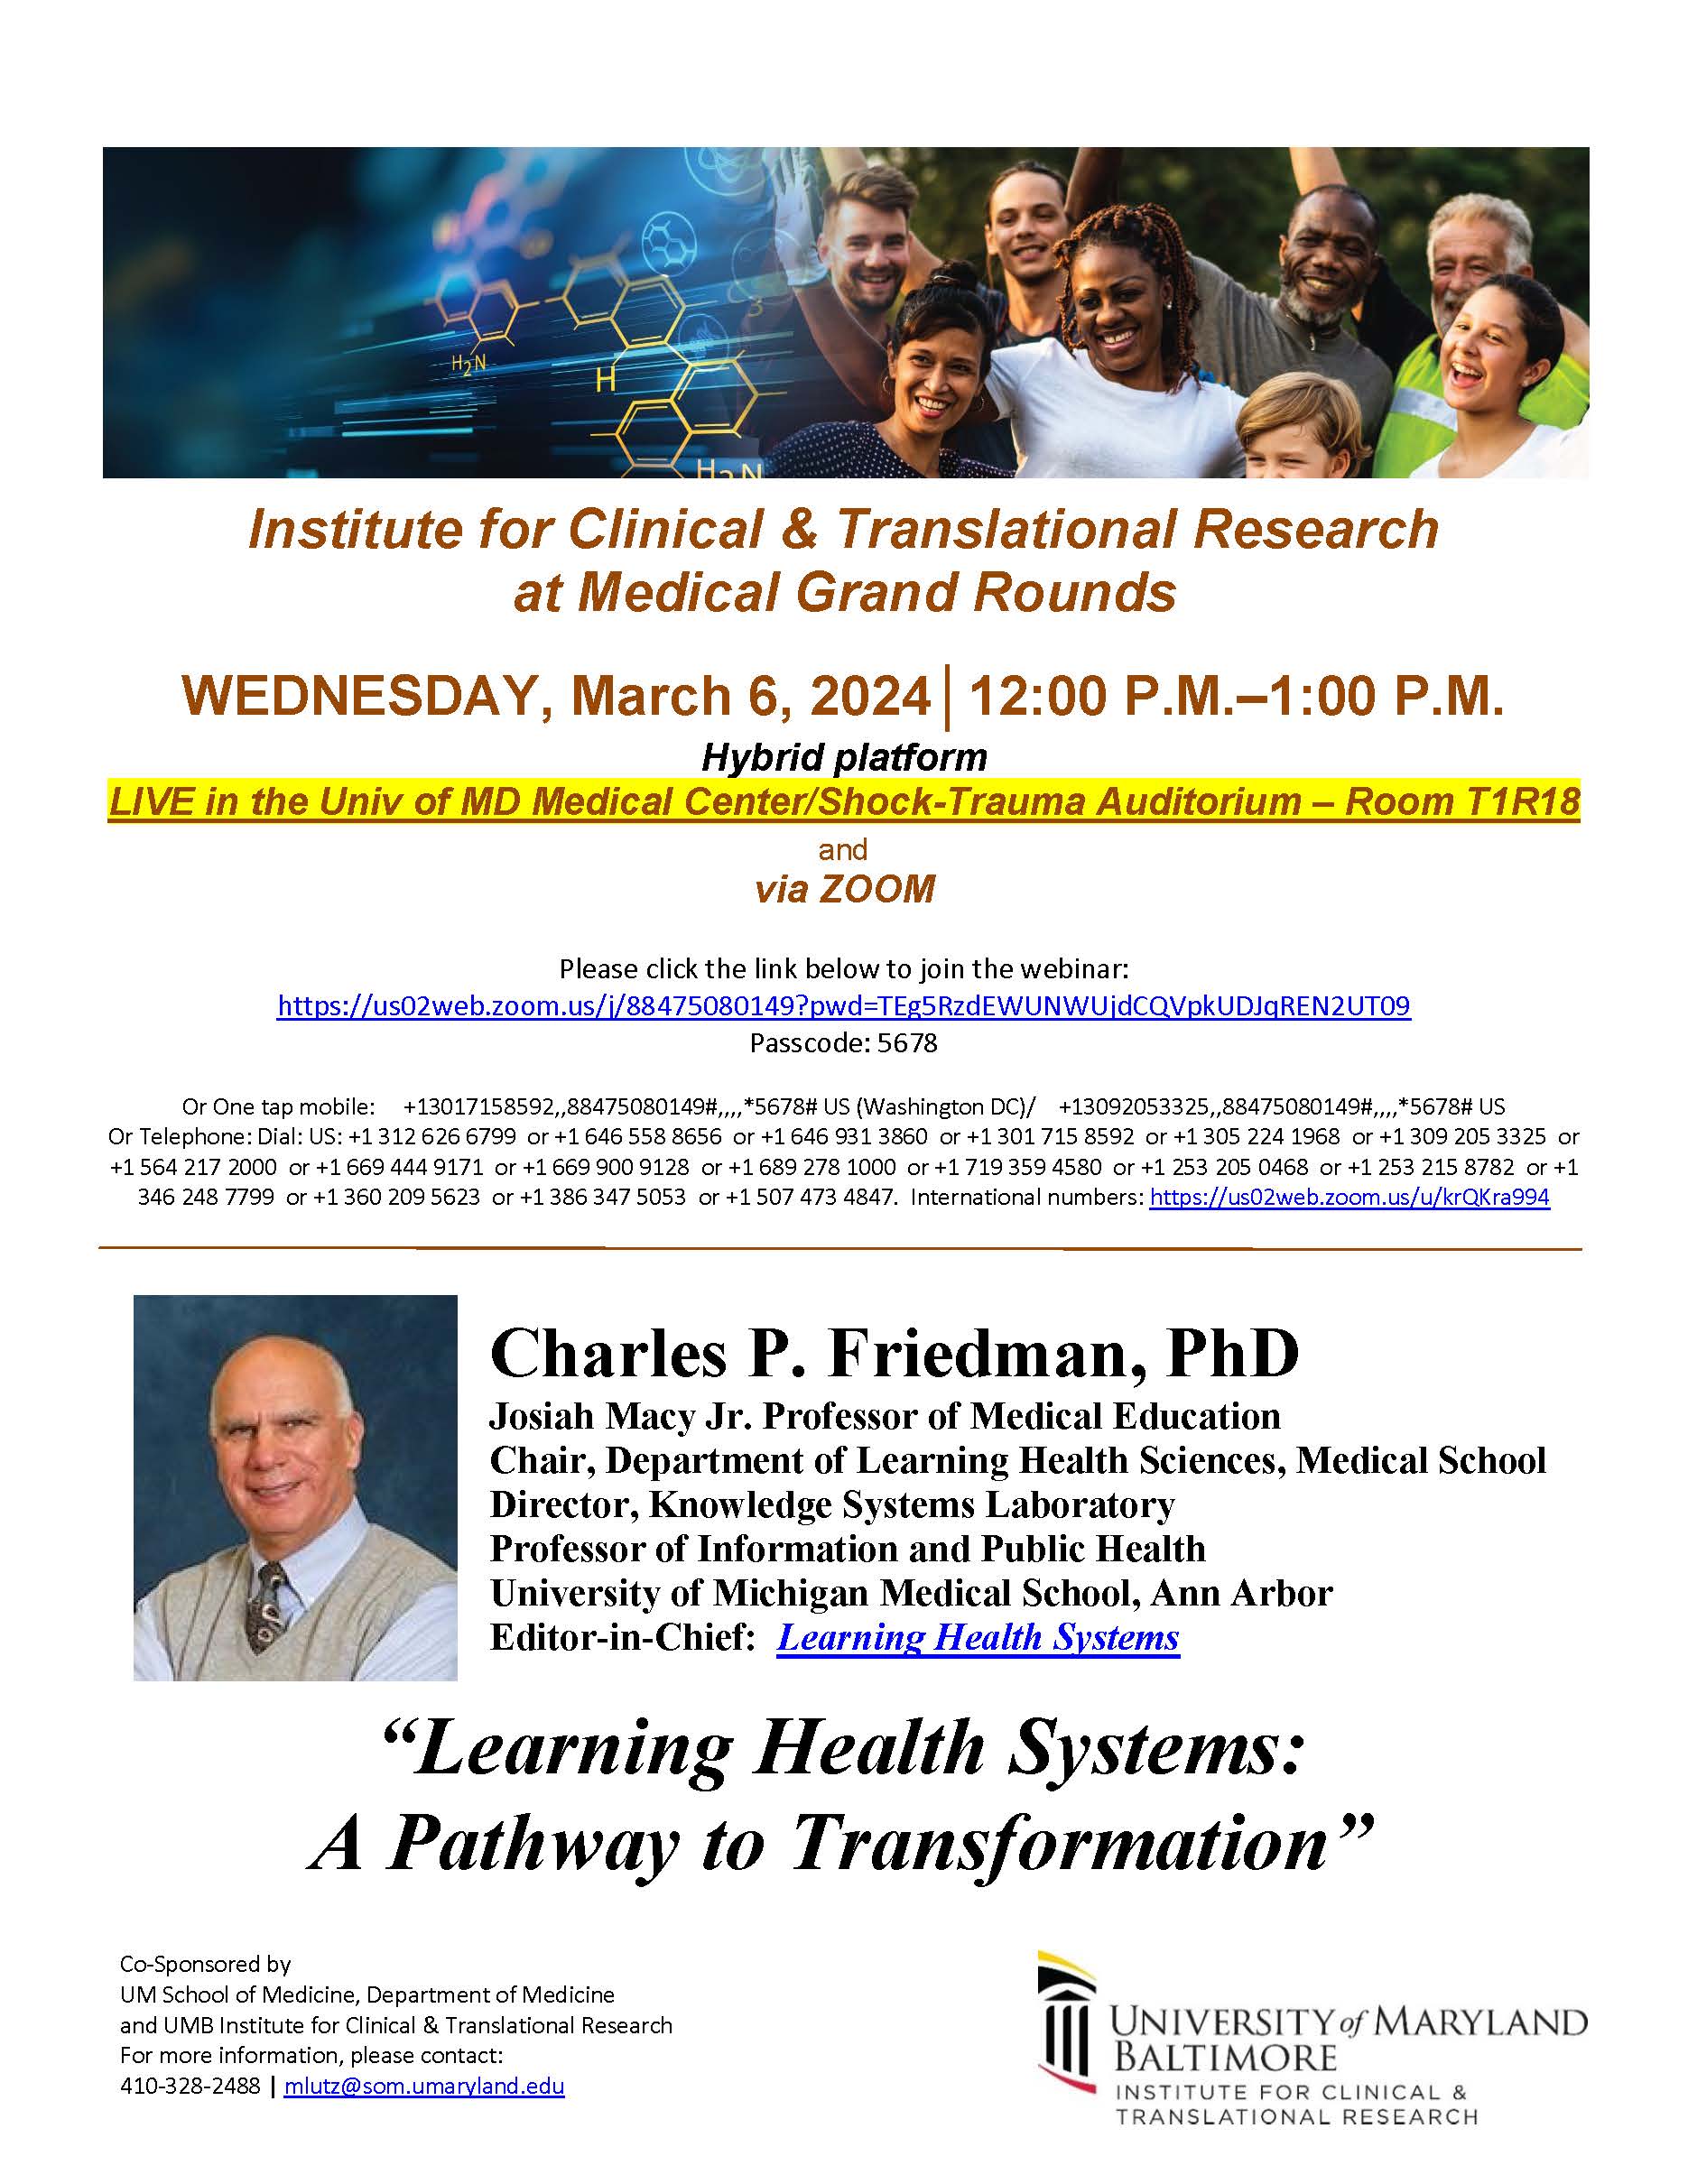 UMB ICTR Grand Rounds March 6, 2024